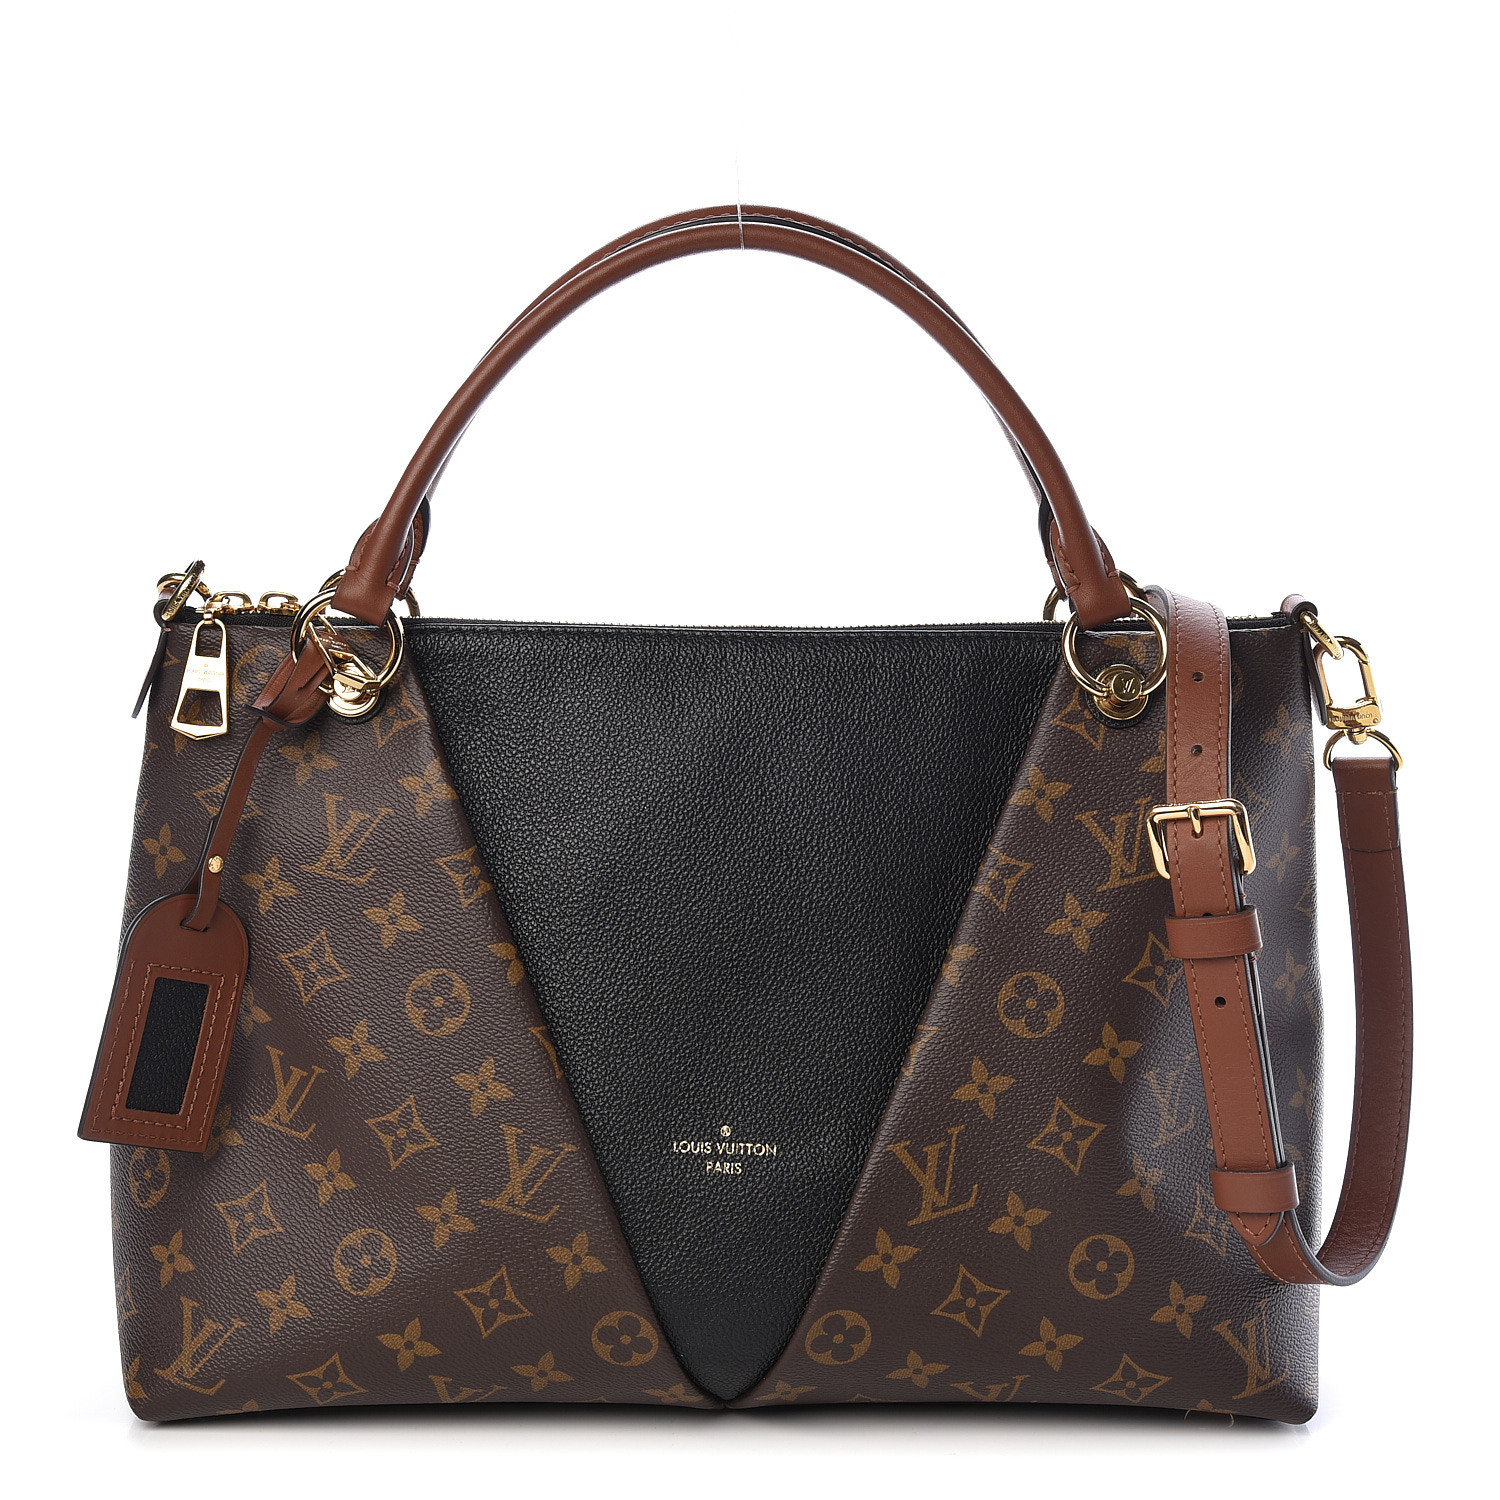 Louis Vuitton Contact Us Email | IQS Executive